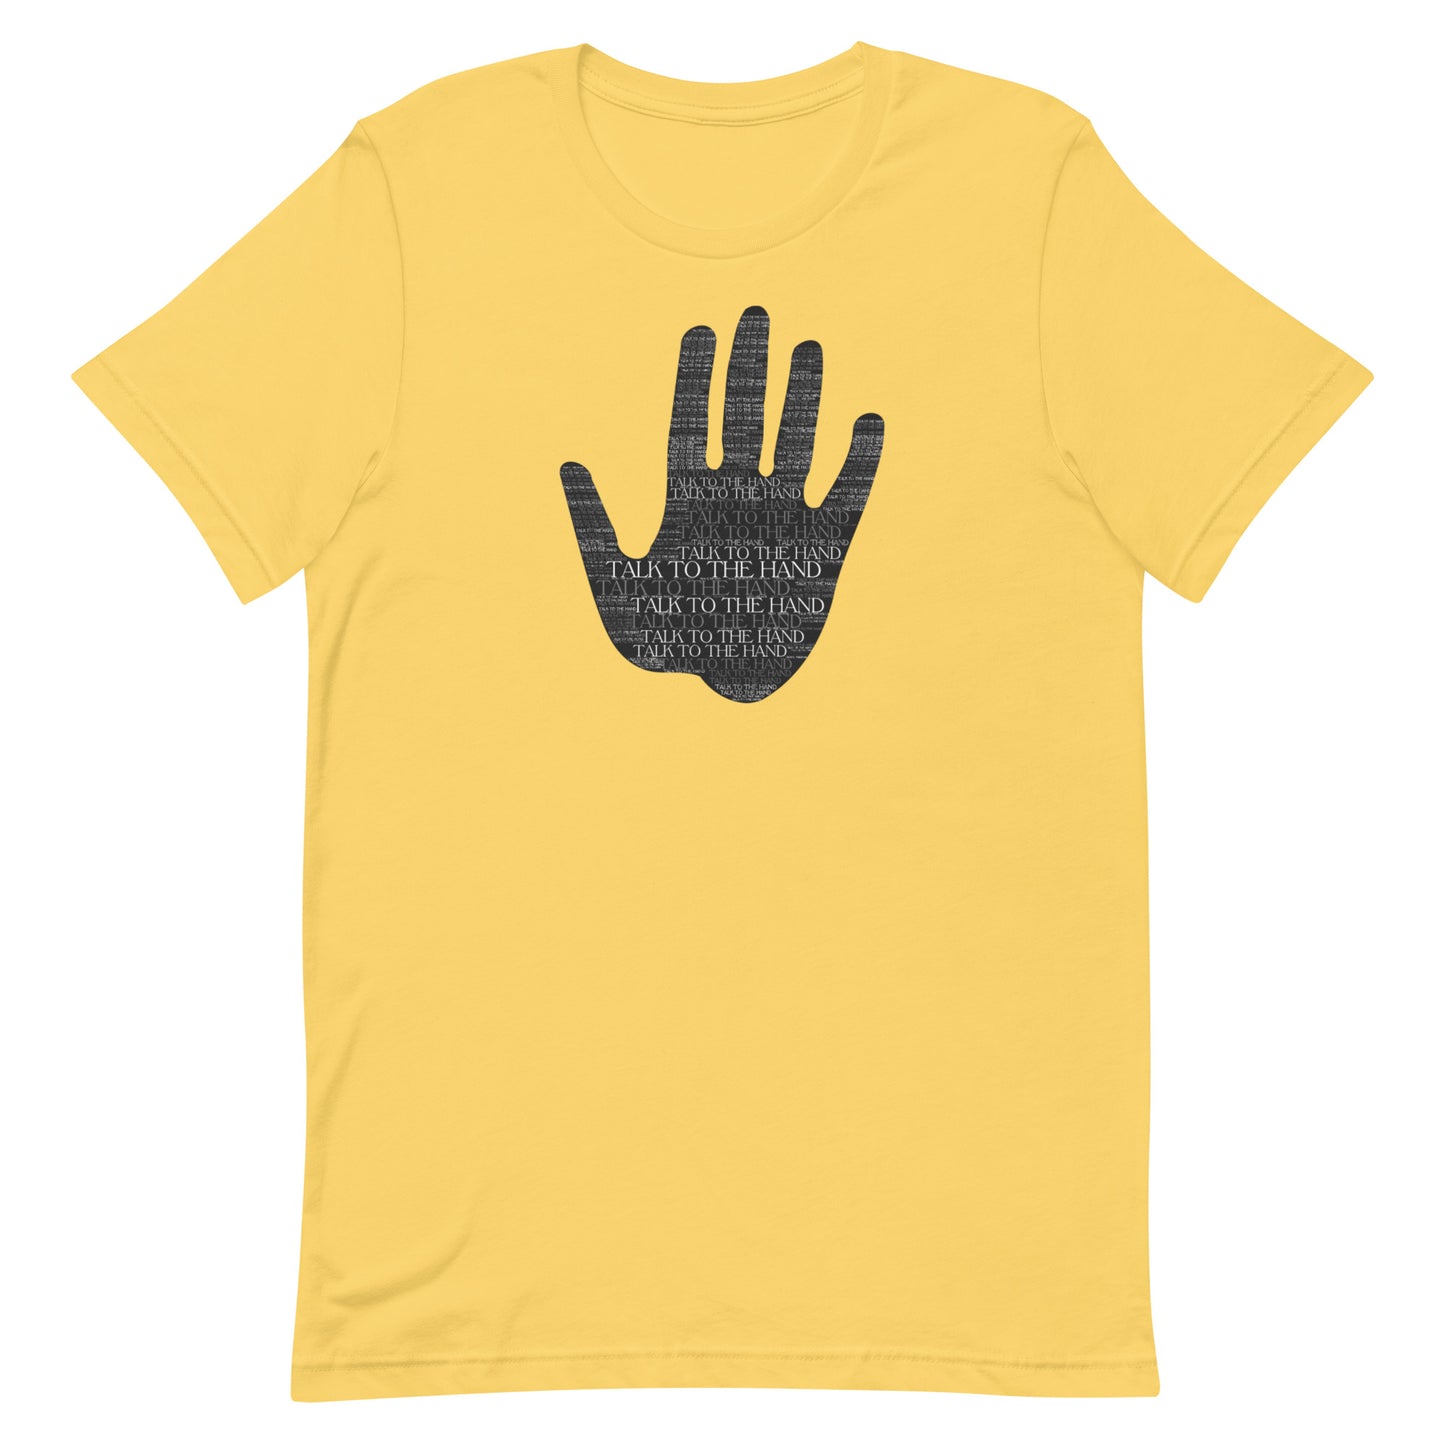 Talk to the Hand - GRAY - S-4XL